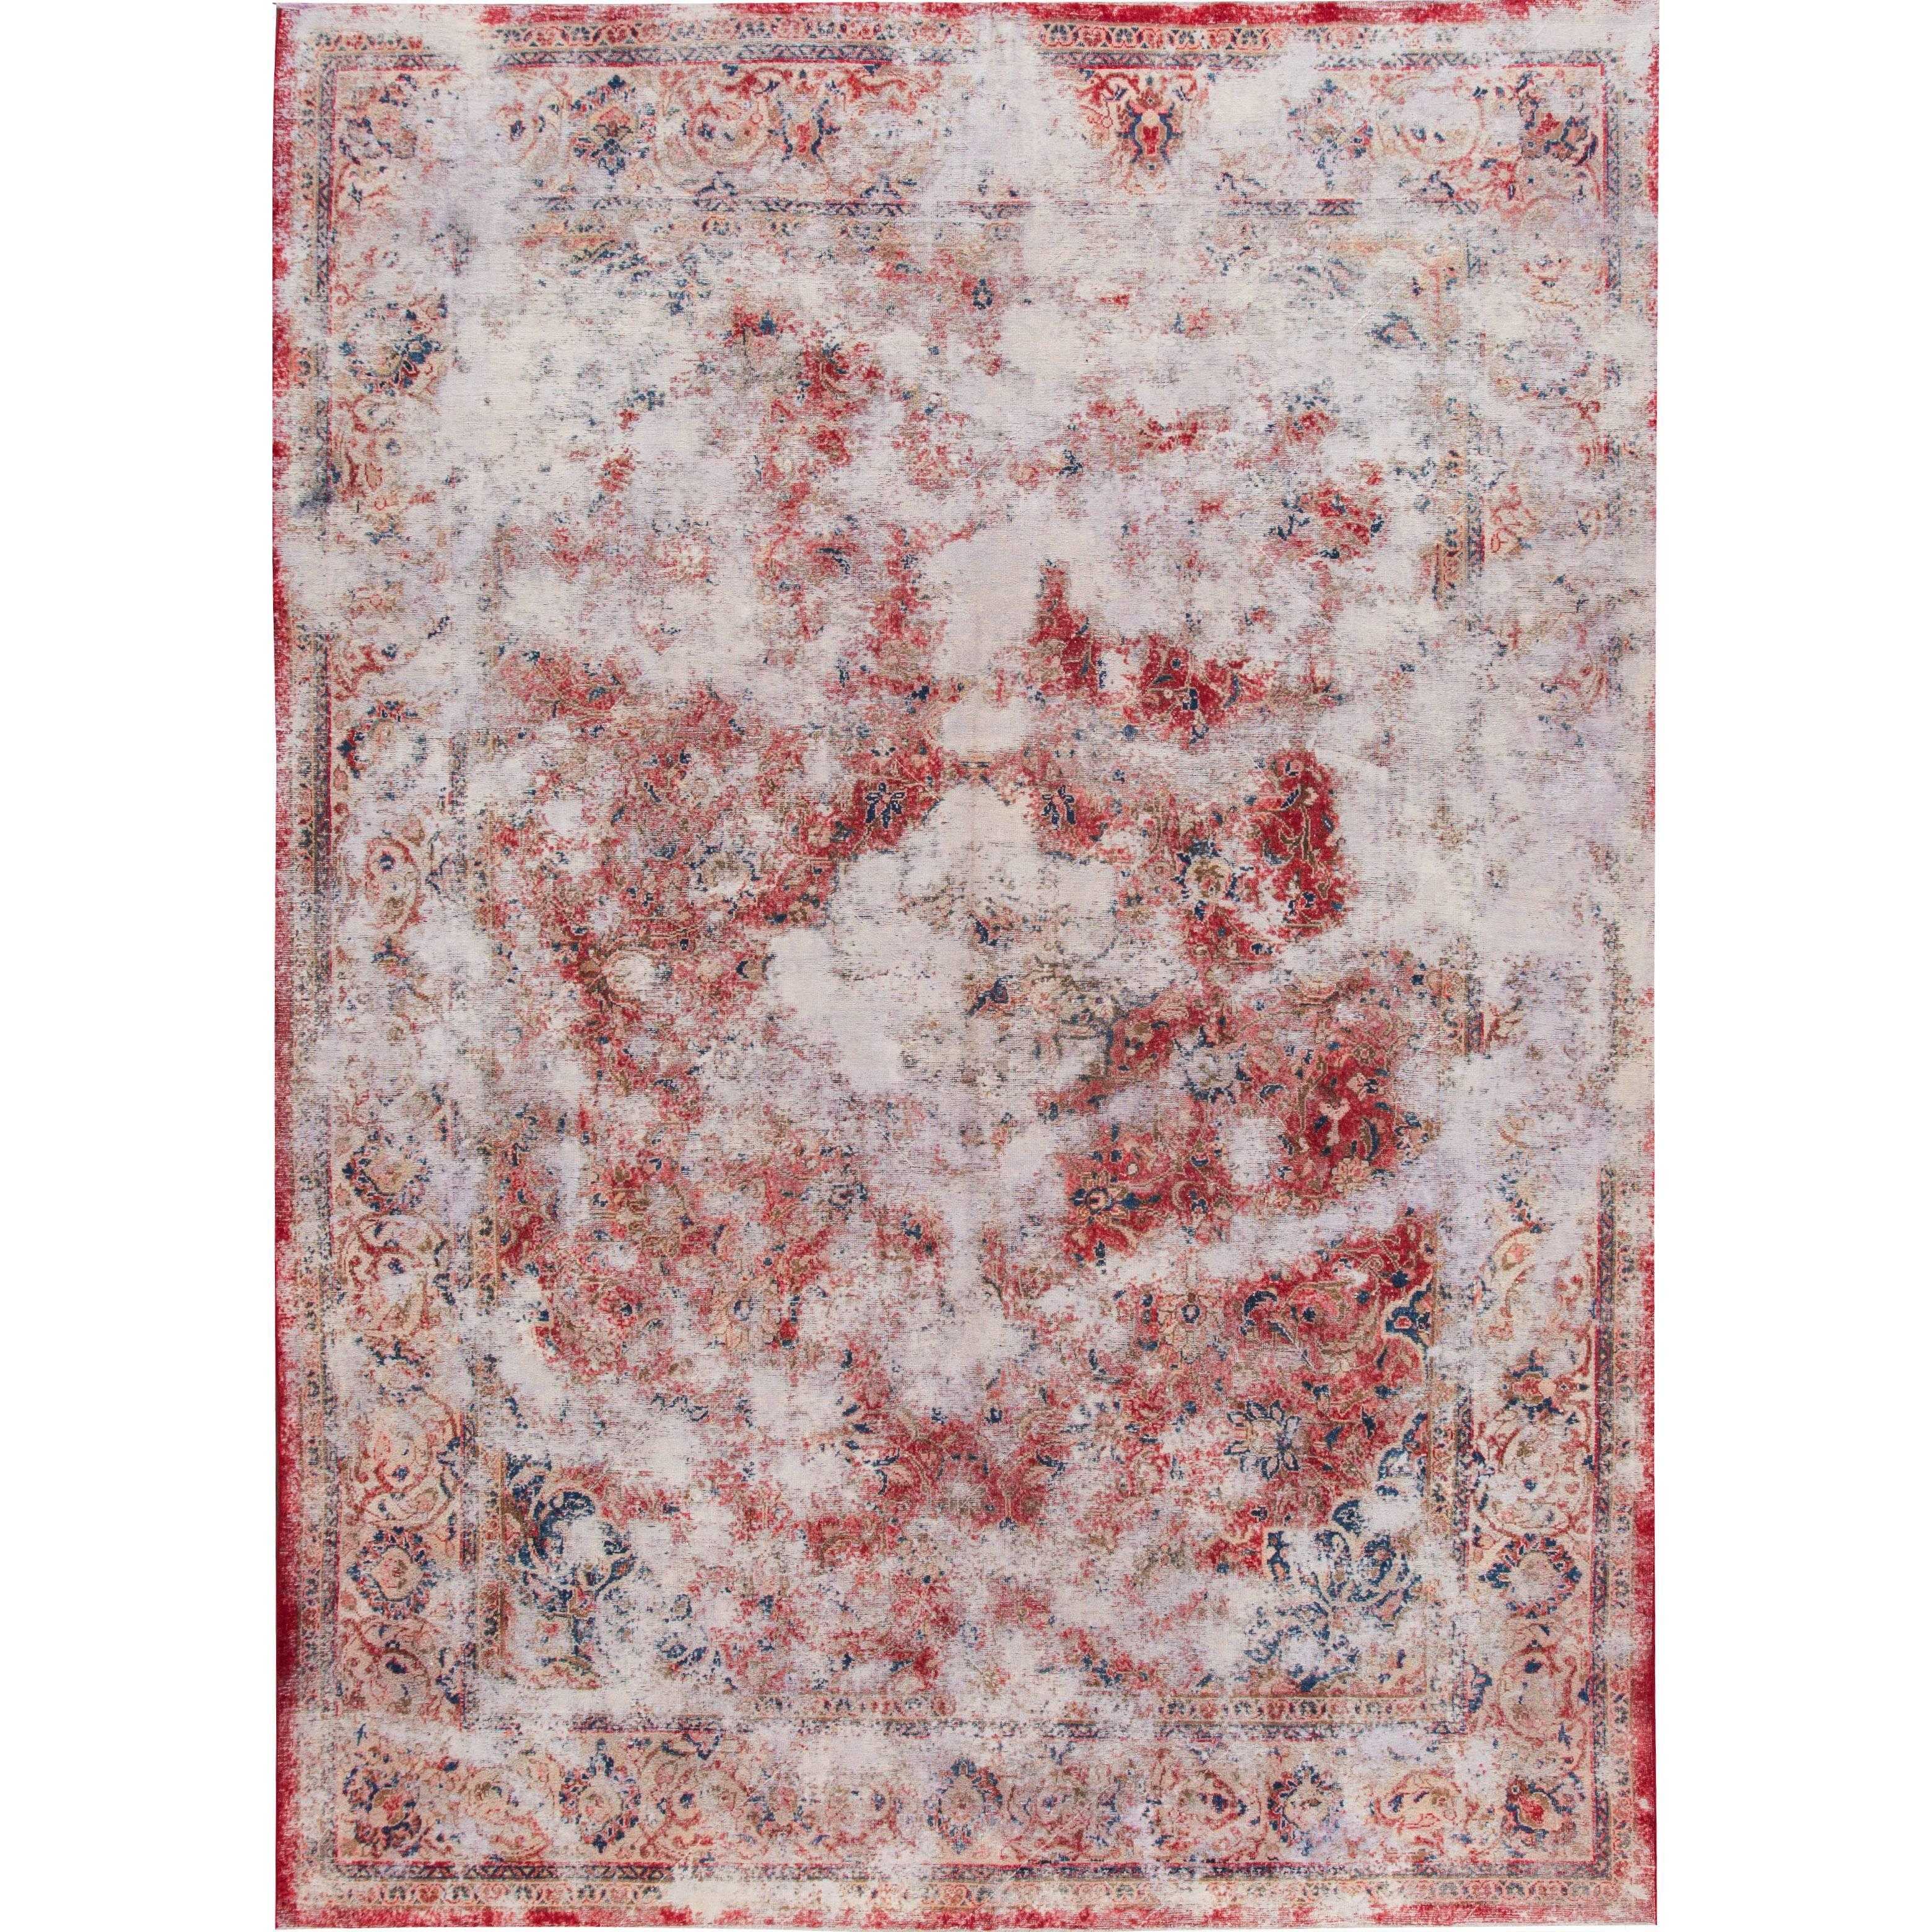 Lovely Nice Vintage Distressed Overdyed Rug For Sale